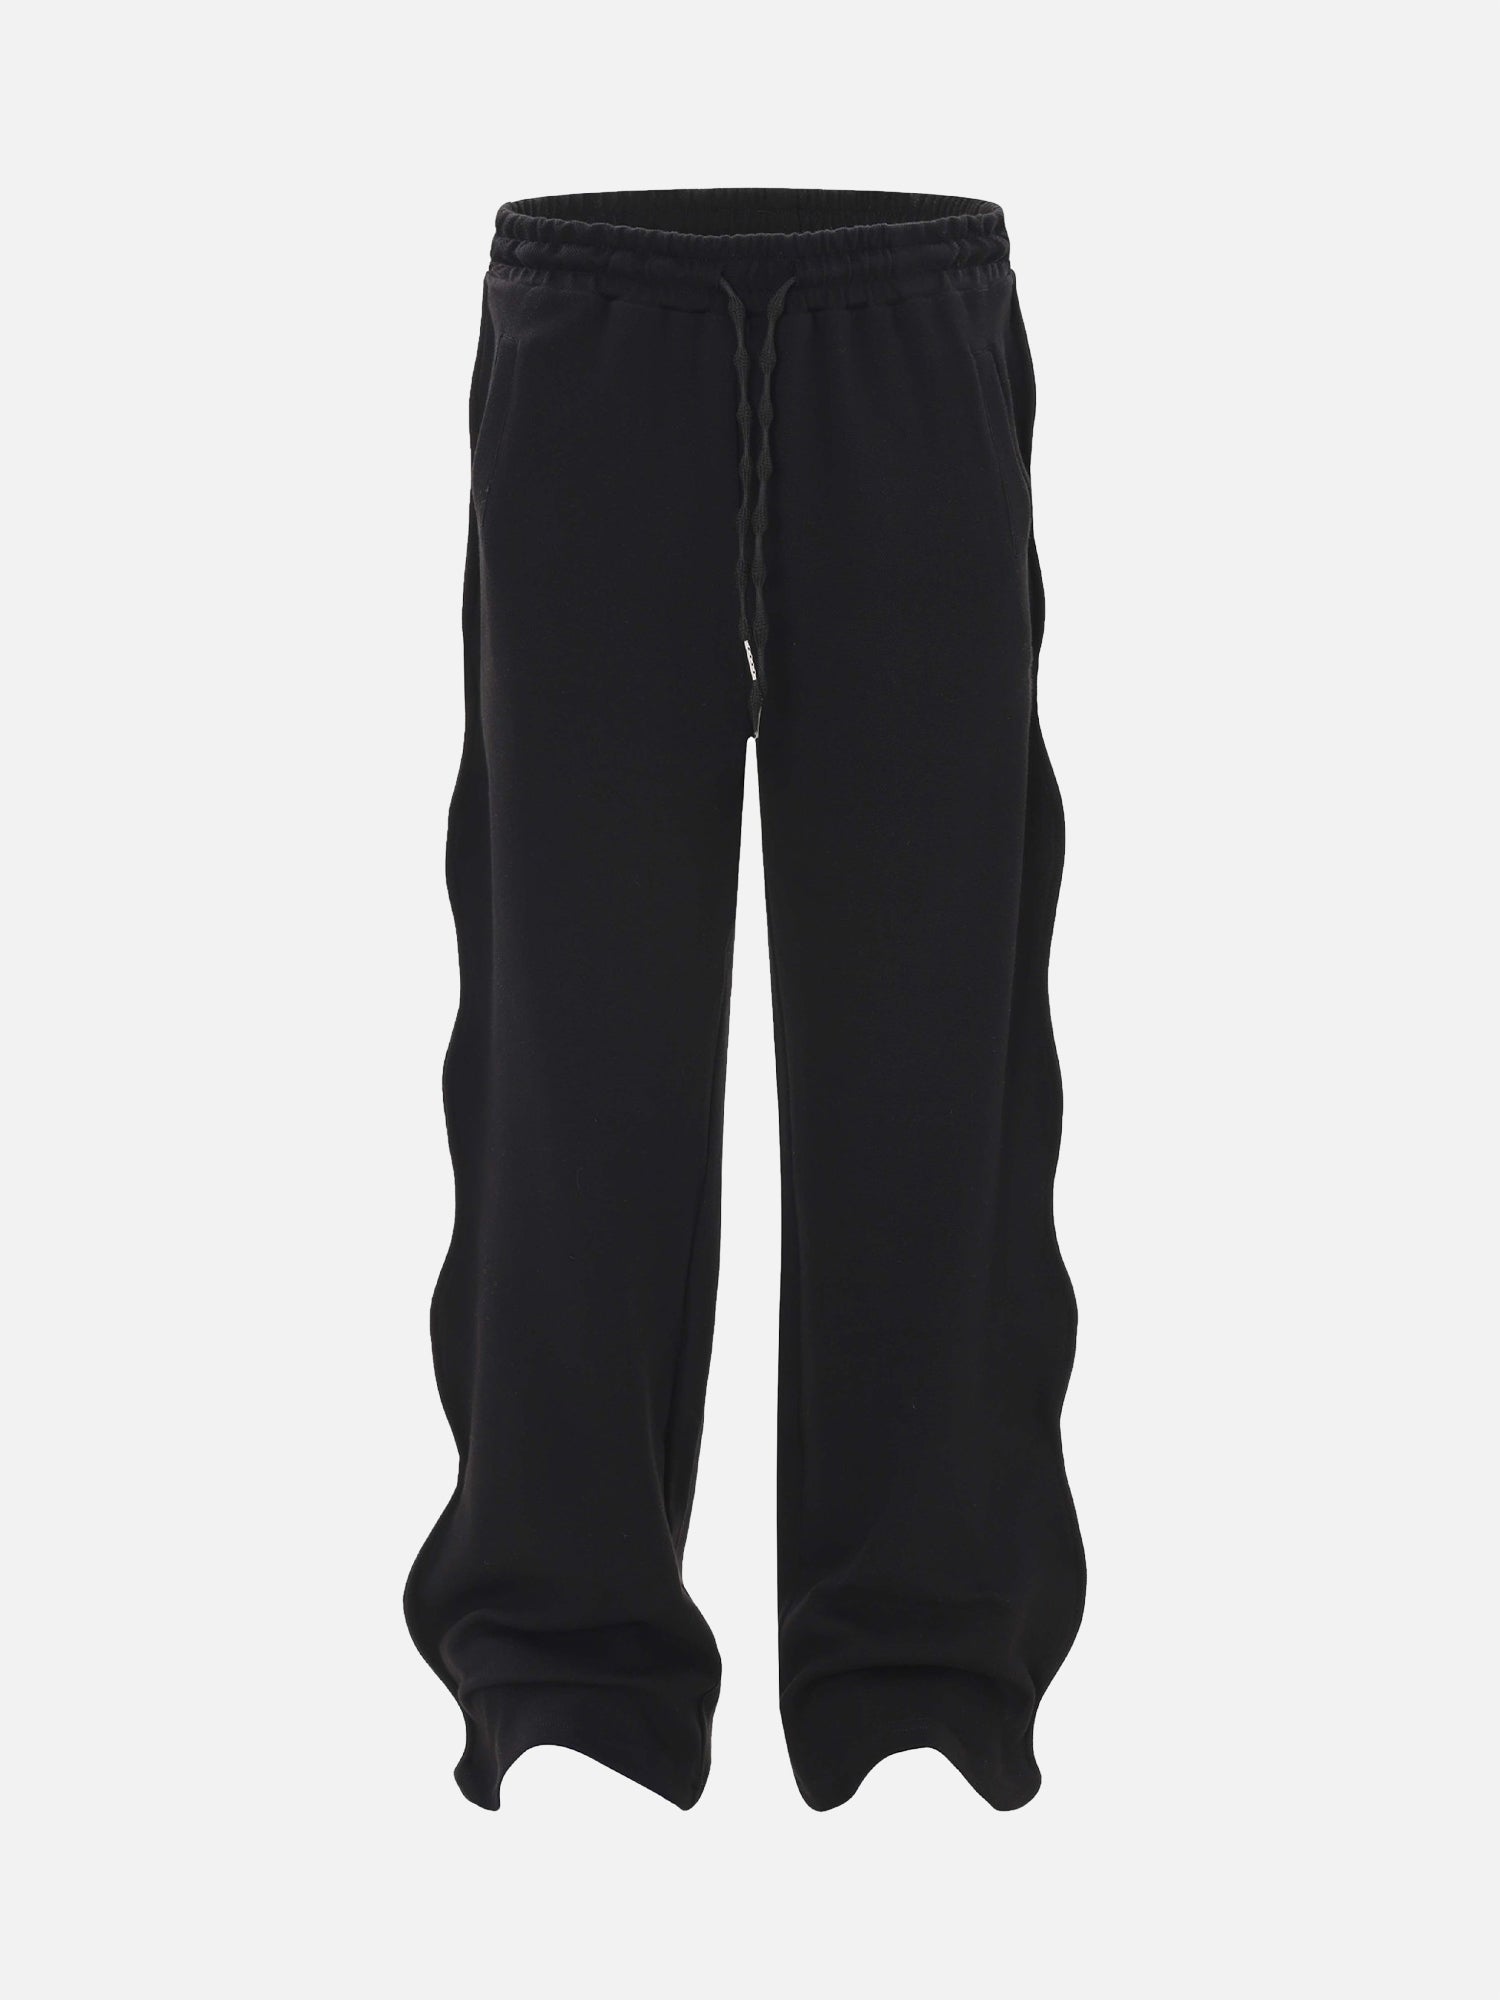 High Street Solid Color Simple Twisted Cuffed Casual Sweatpants